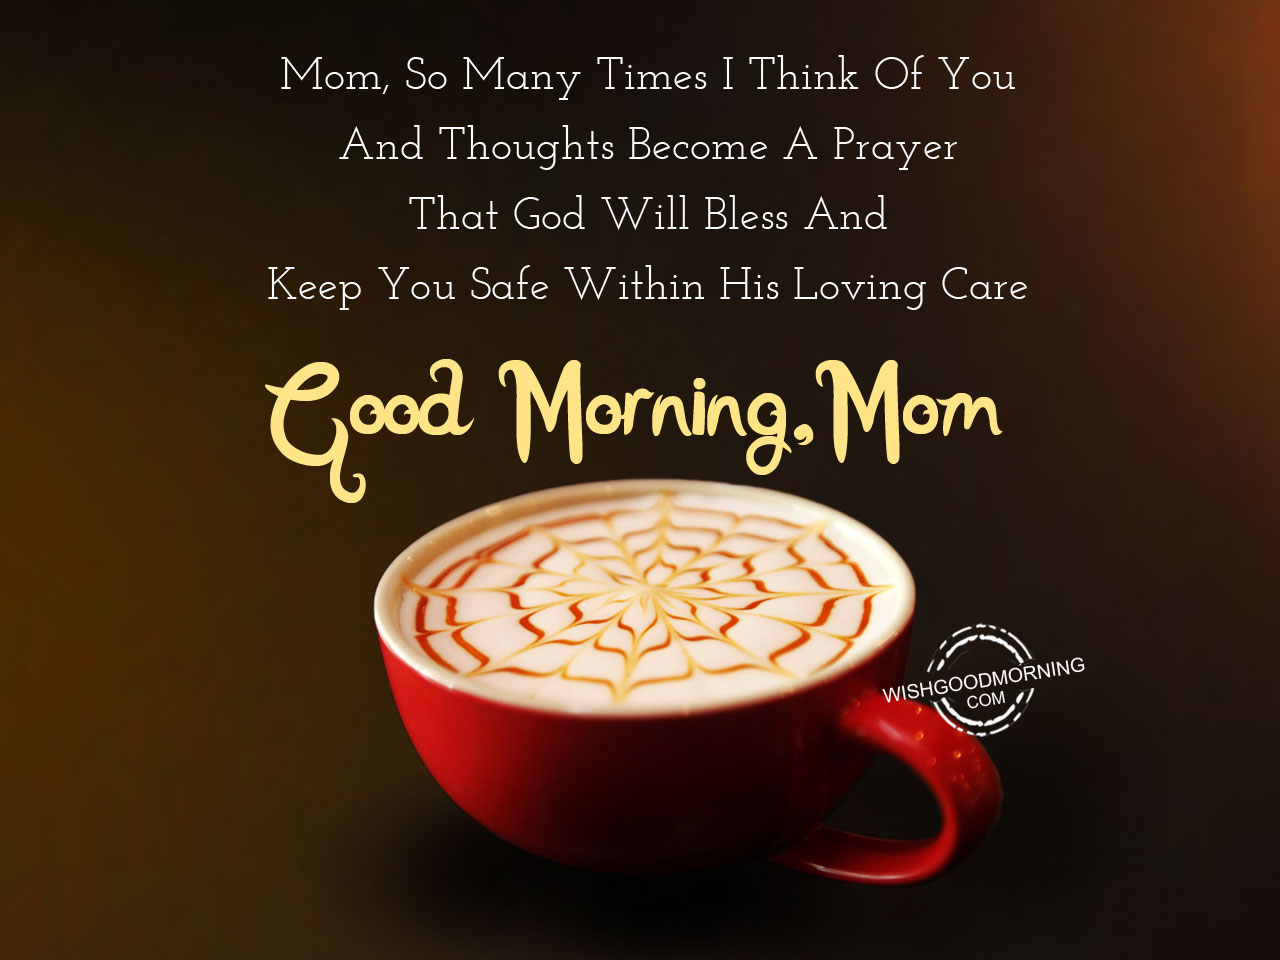 Good Morning Wishes For Mother - Good Morning Pictures ...